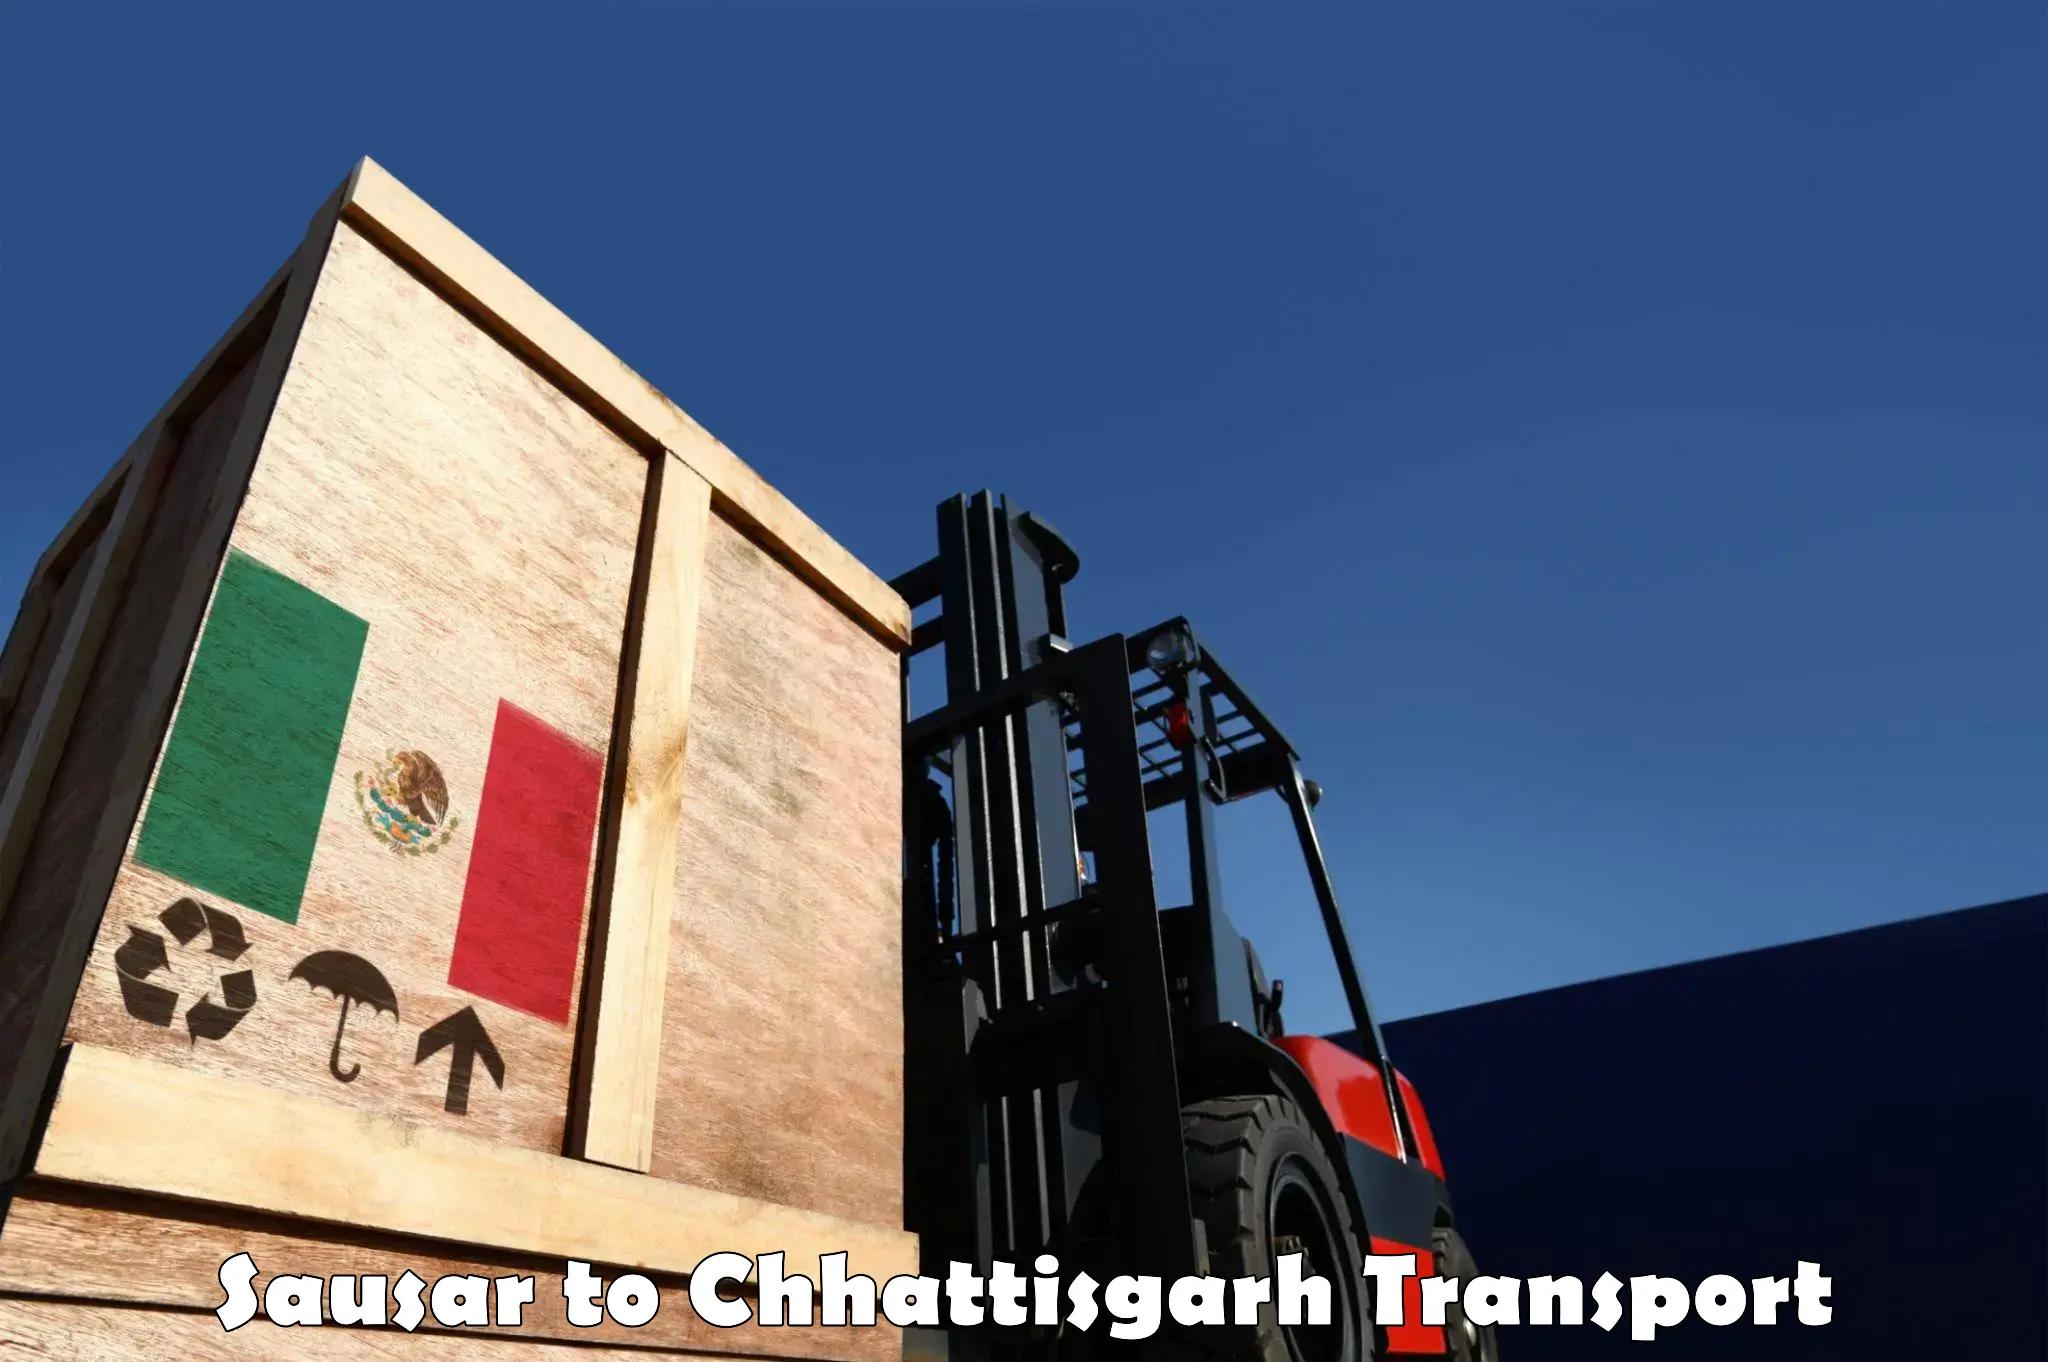 Truck transport companies in India Sausar to Ratanpur